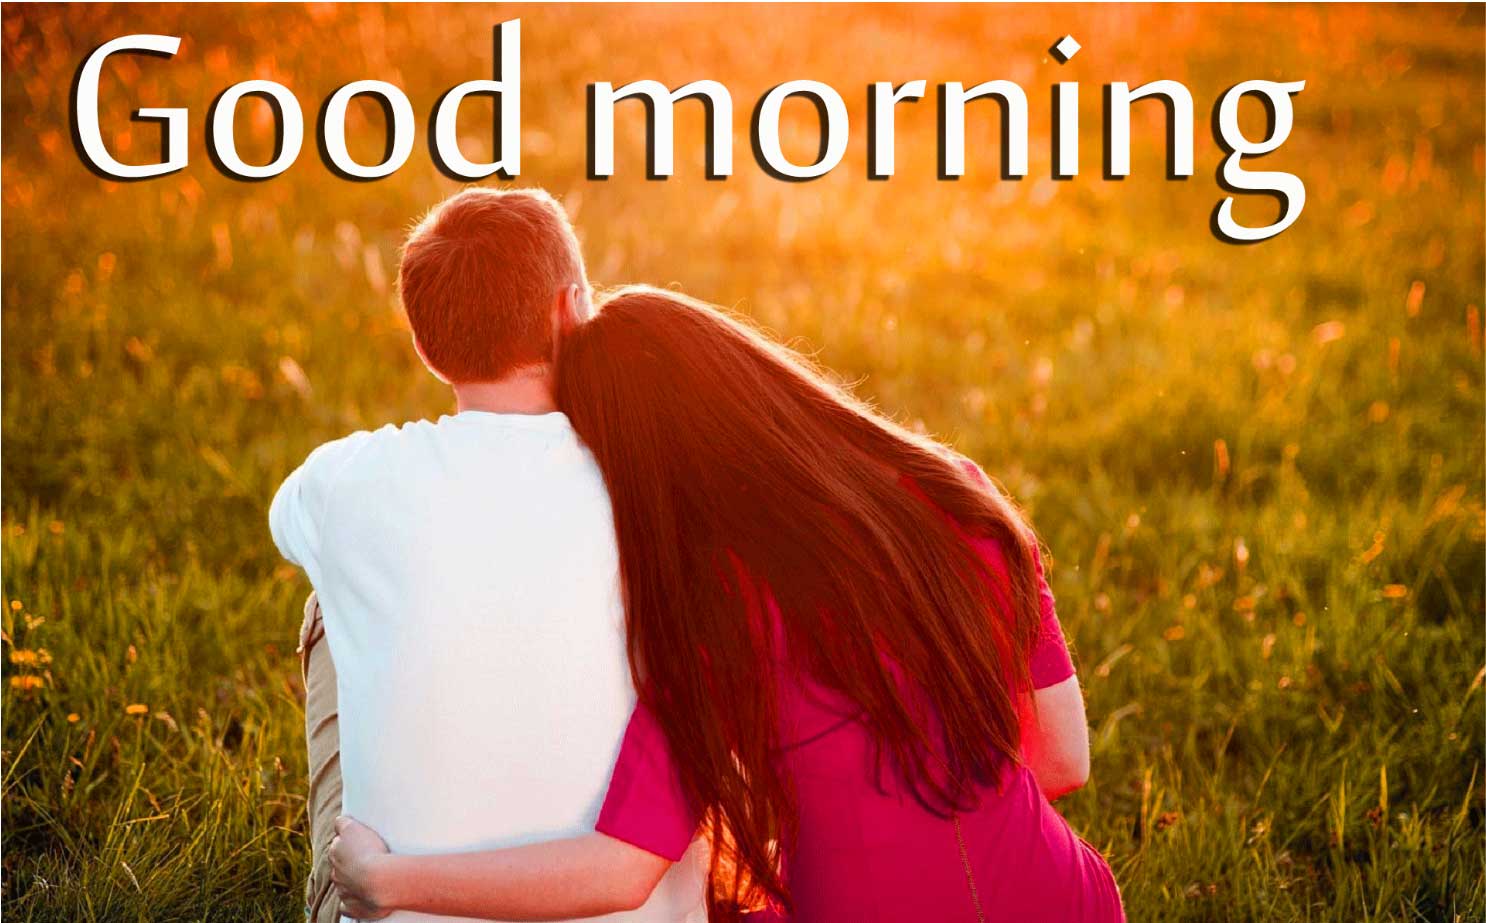 Good Morning Love Couple Image HD Download HD Pic Download HD Wallpaper